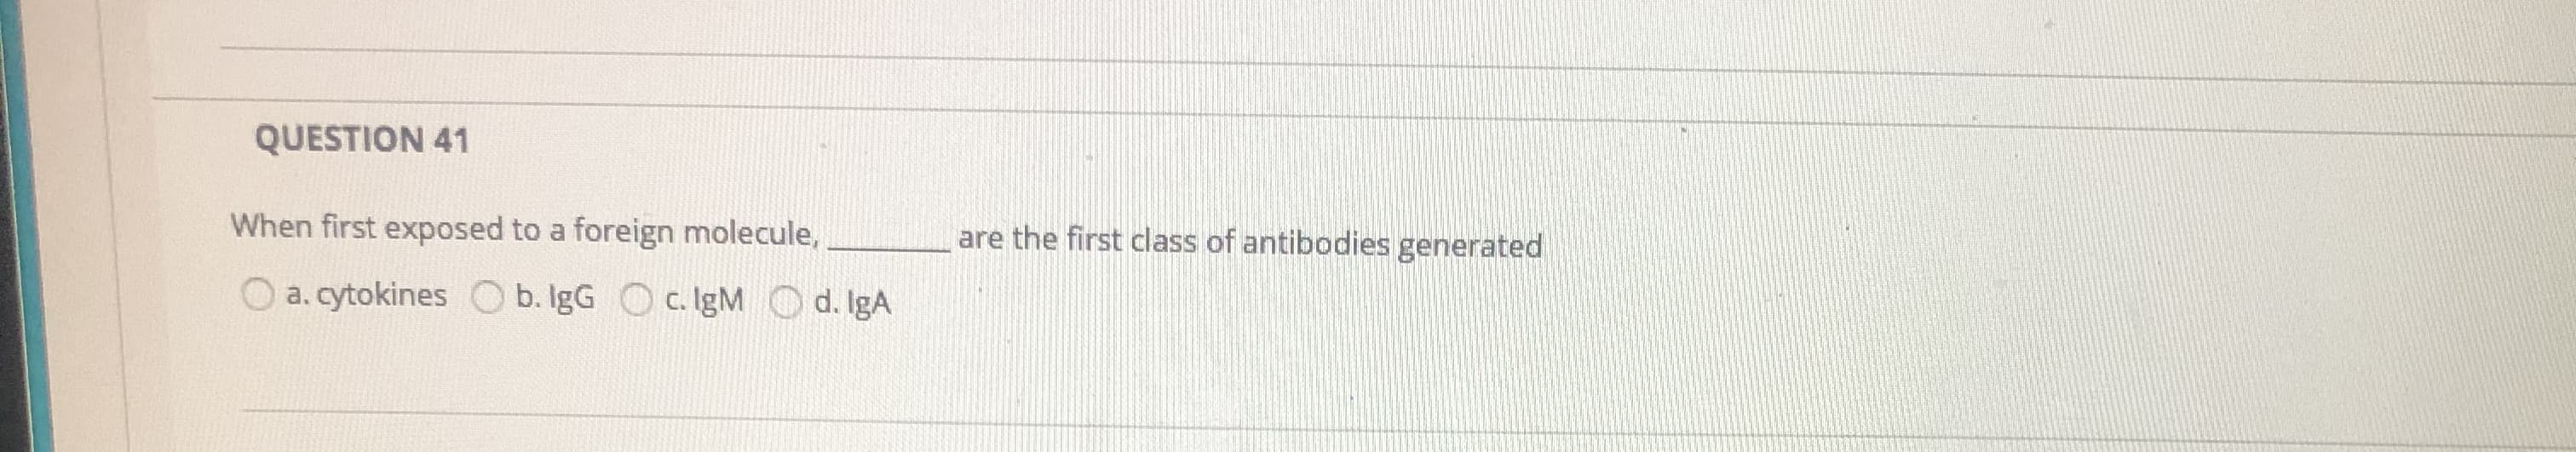 When first exposed to a foreign molecule,
are the first class of antibodies generated
a. cytokines
b. IgG O c. IgM O d. IgA
